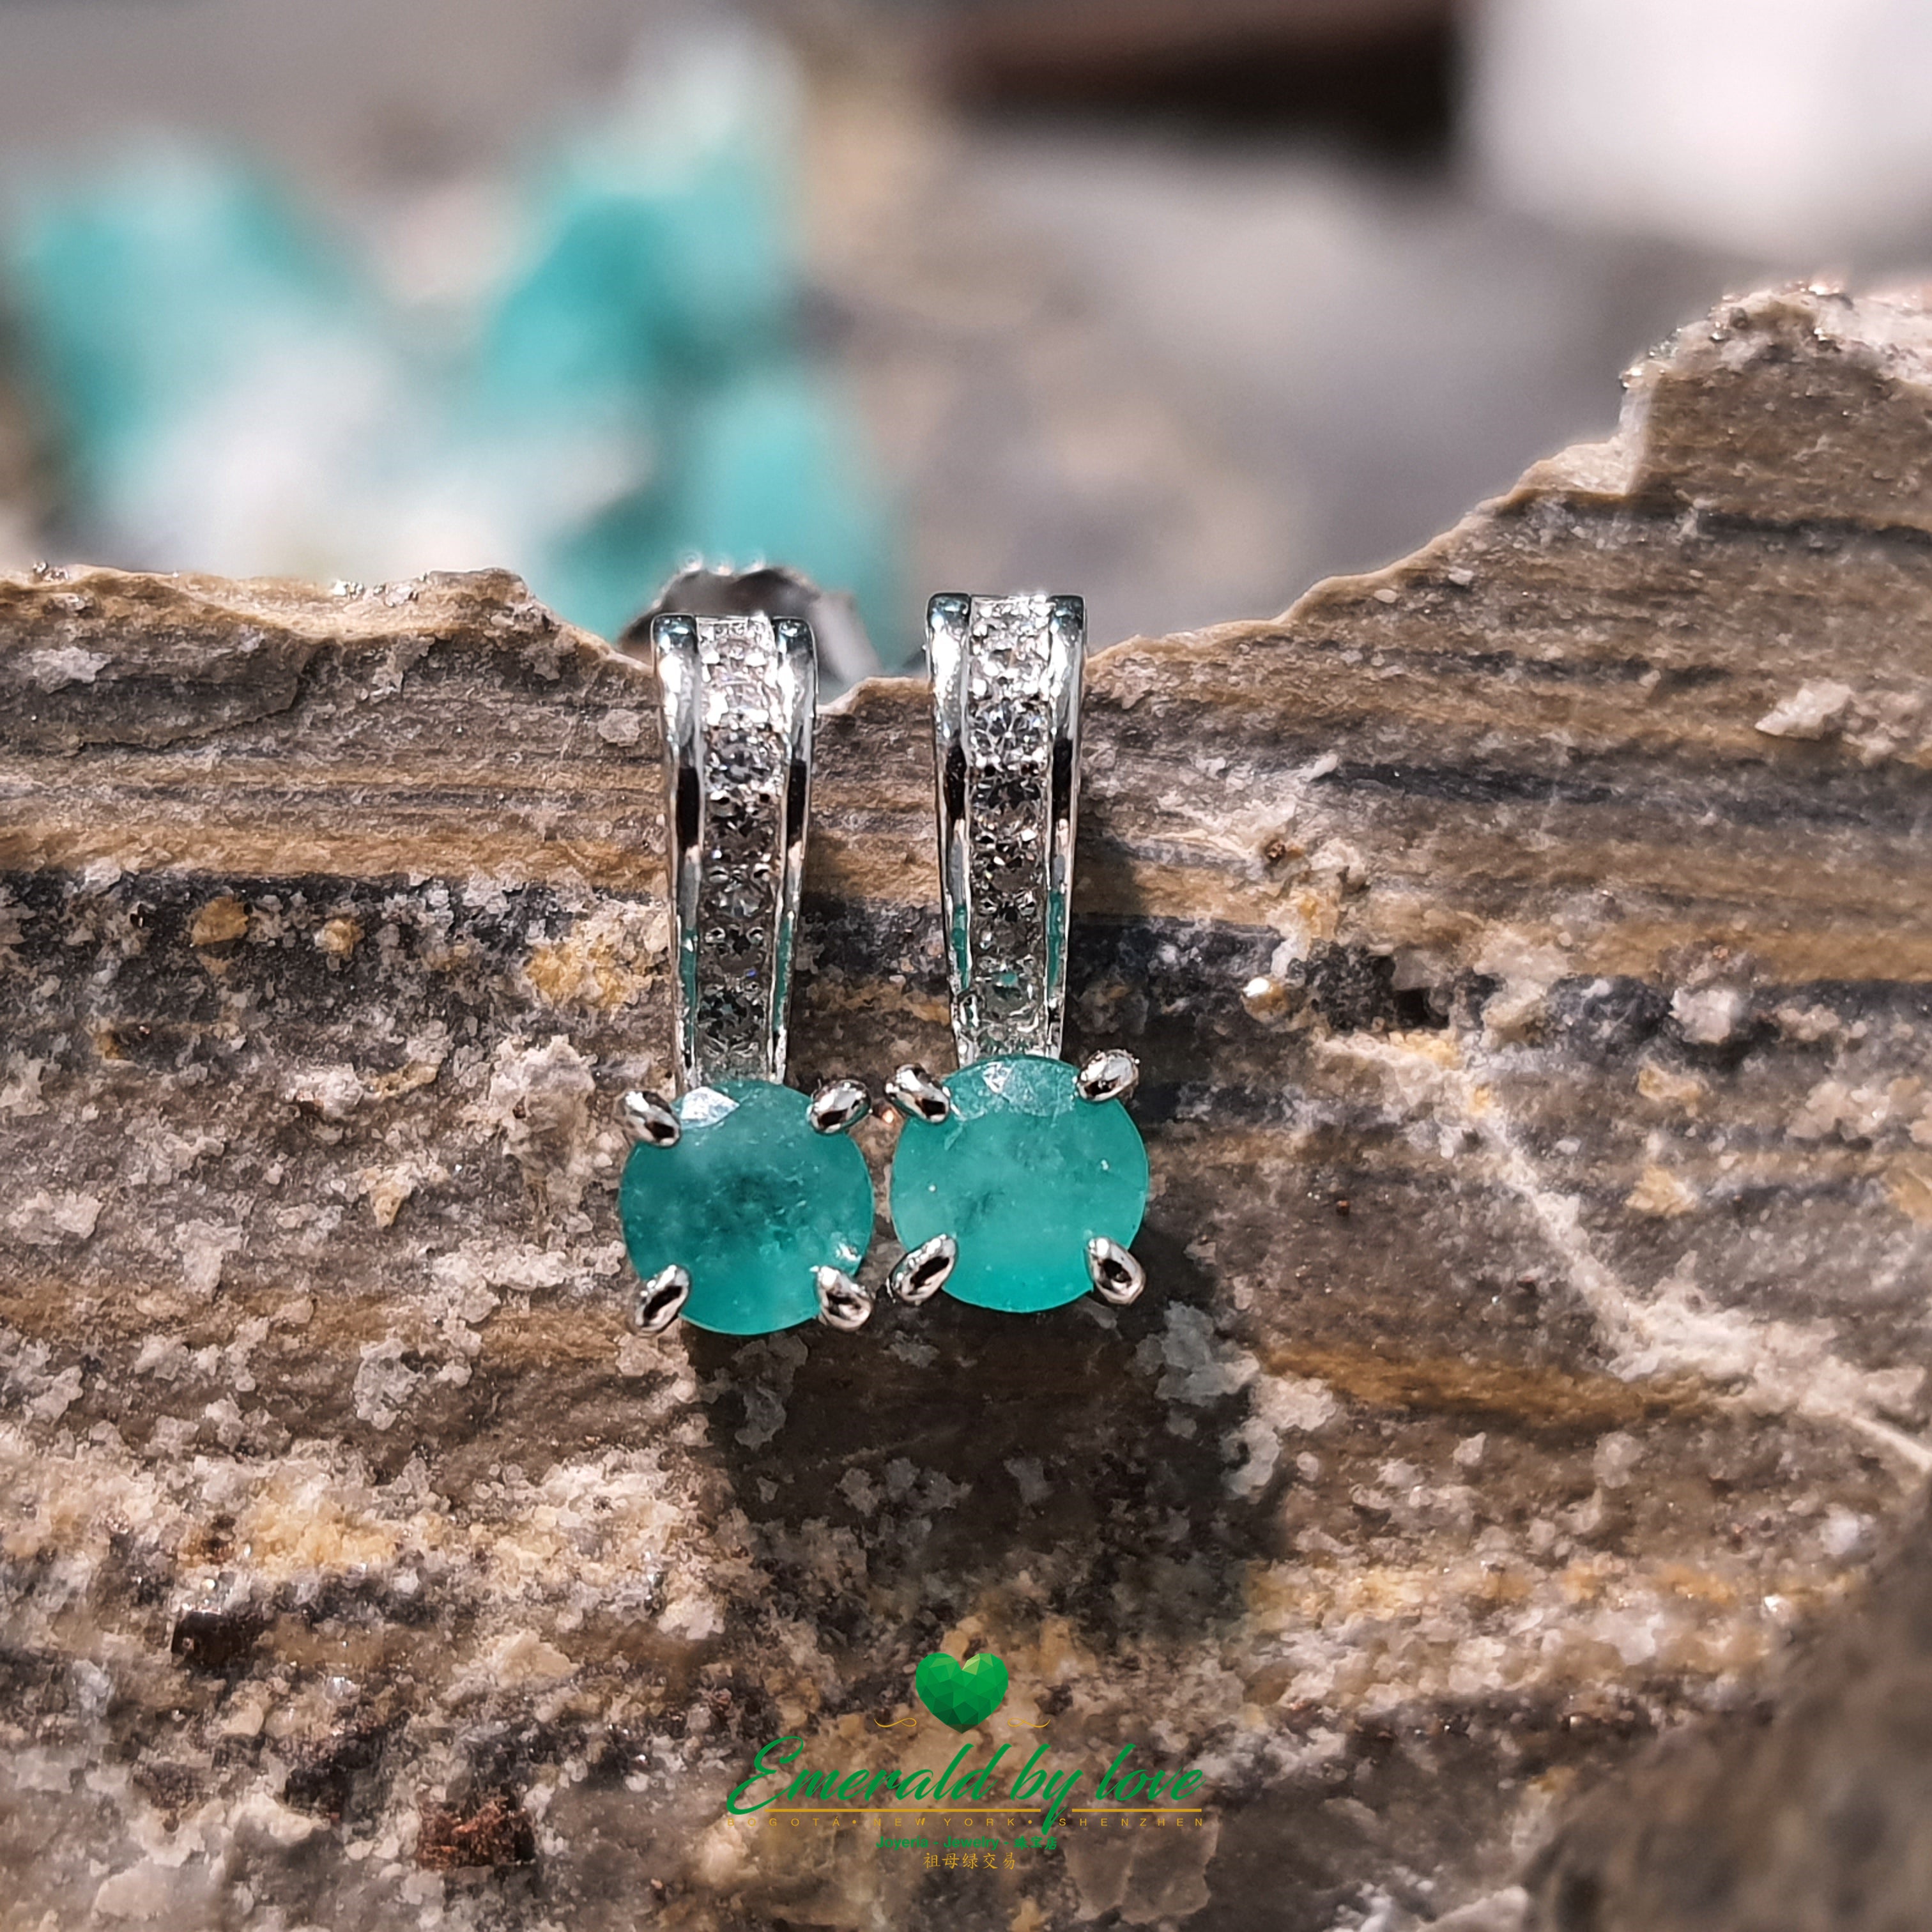 Elongated Sterling Silver Earrings with Round Colombian Emerald and Cubic Zirconia